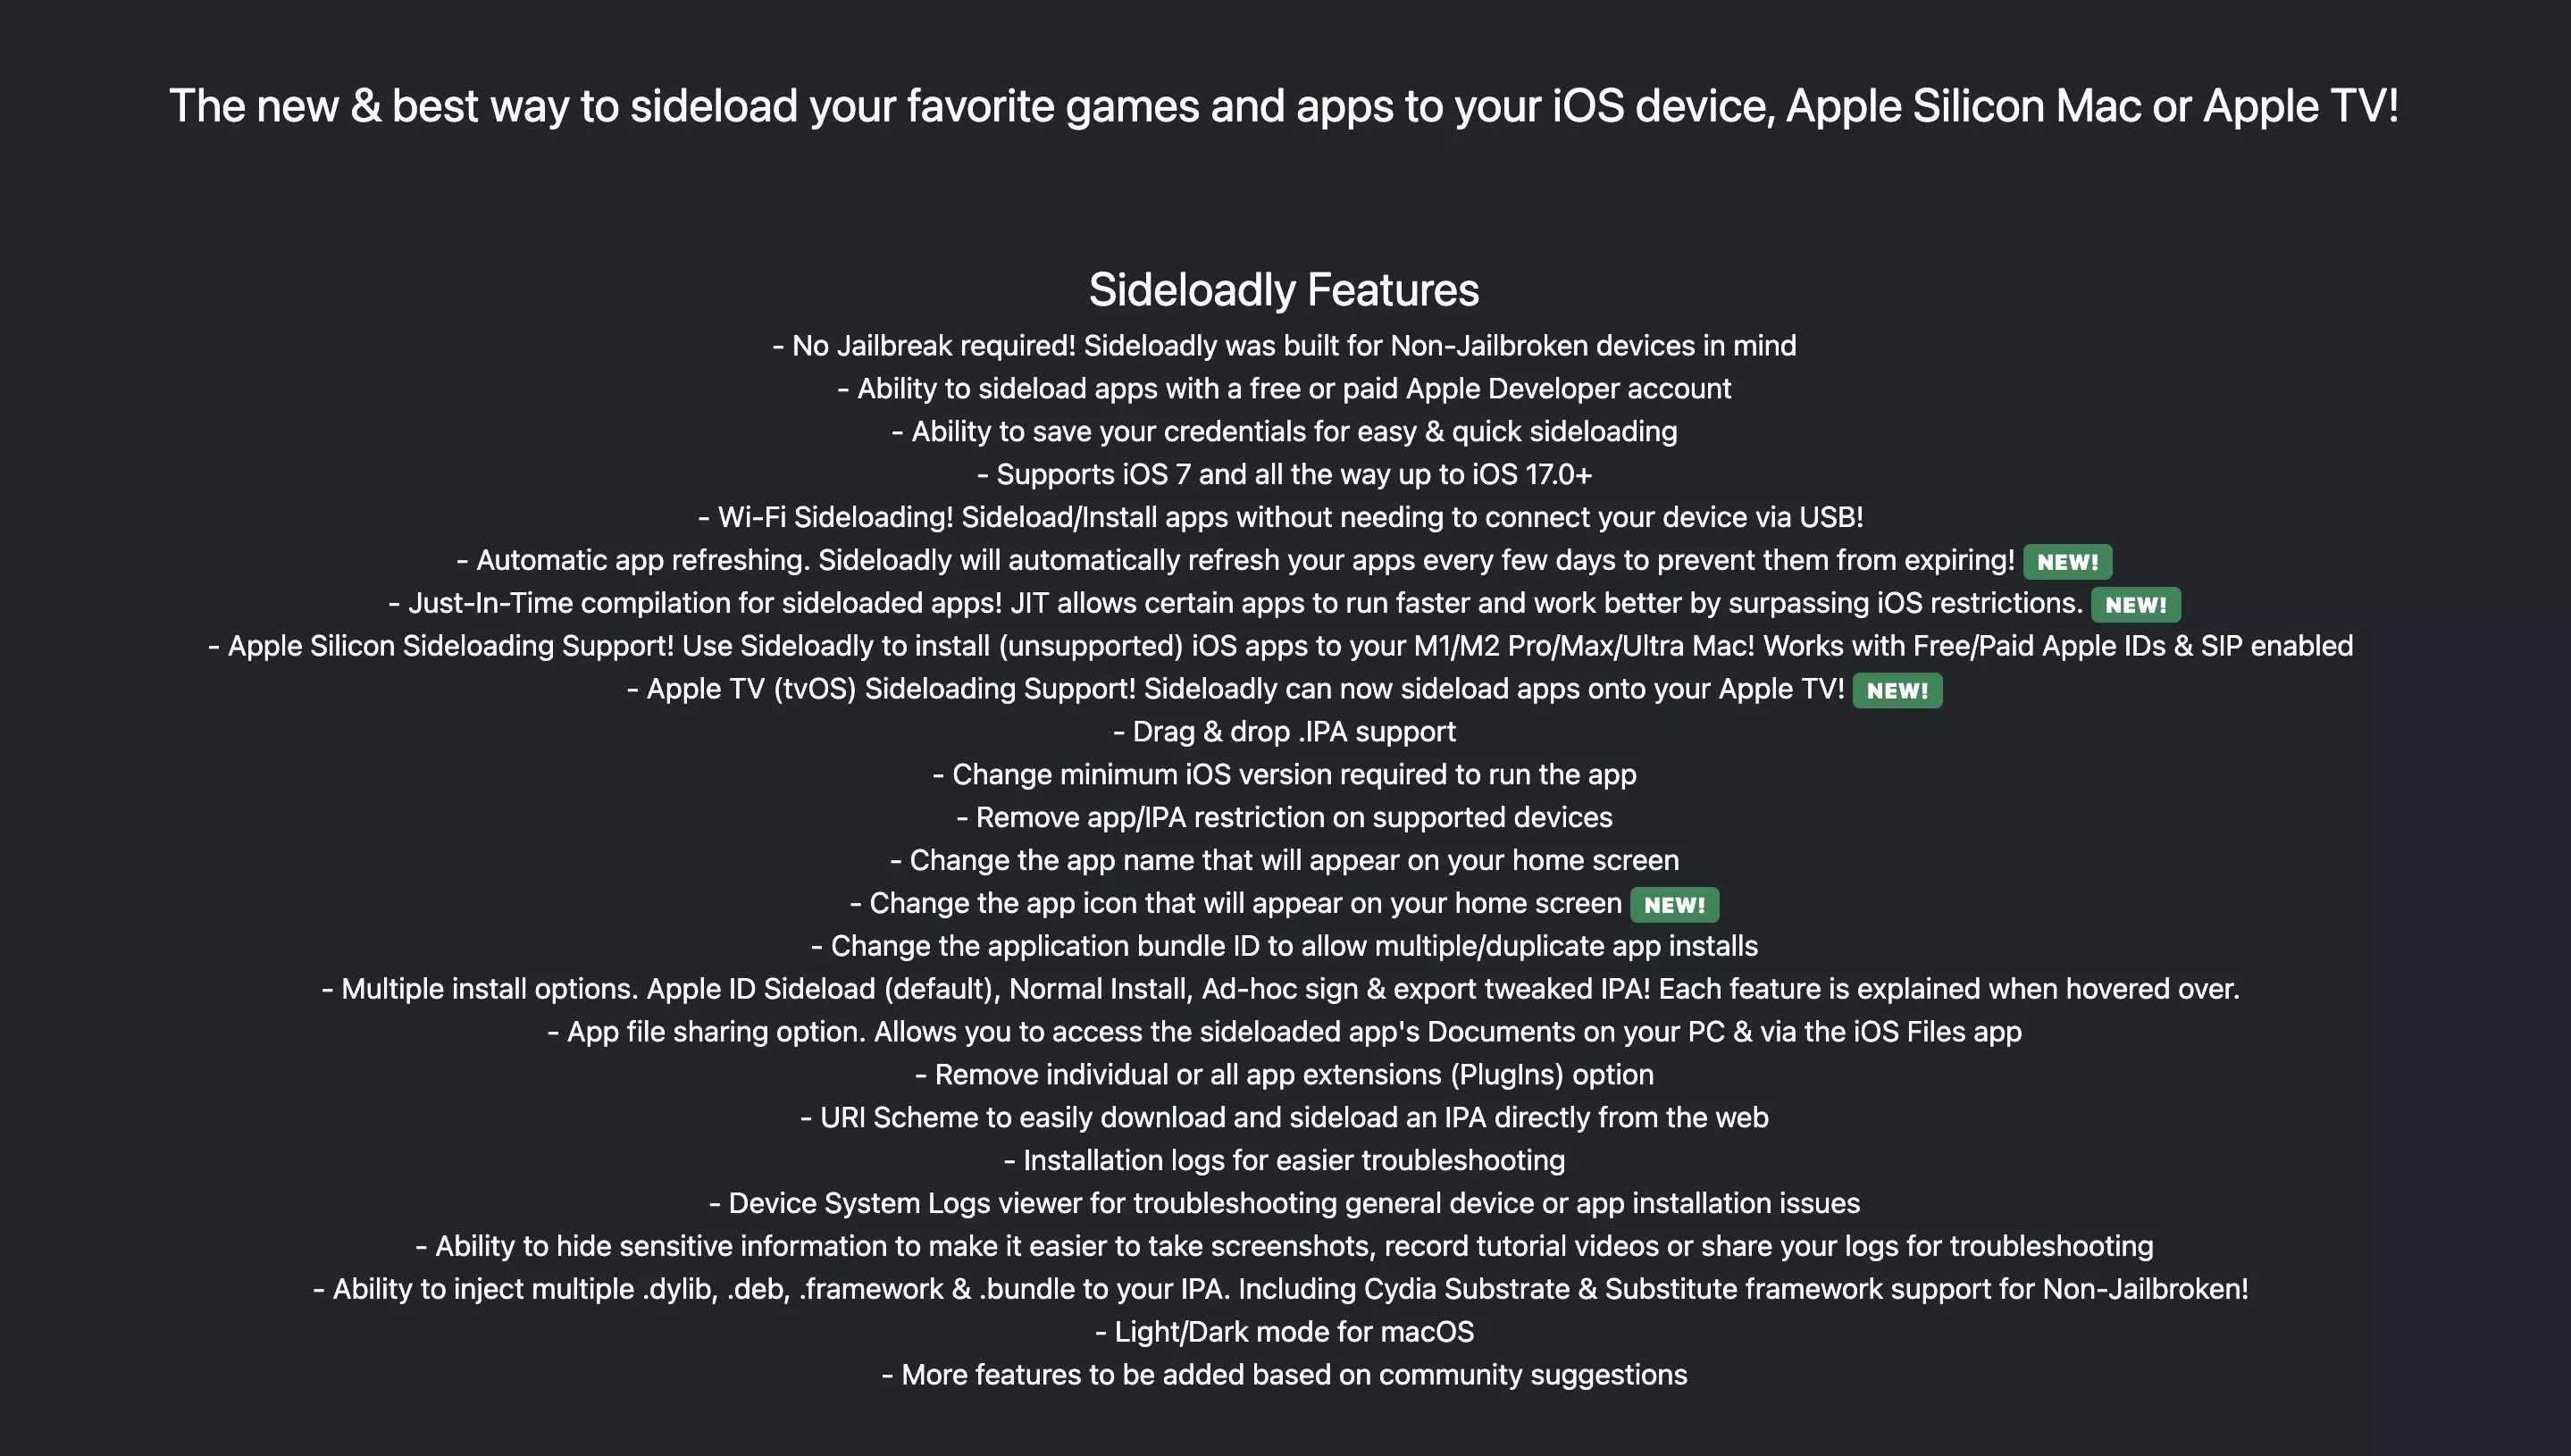 A screenshot of the Sideloadly website that states:
<p>The new &amp; best way to sideload your favorite games and apps to your iOS device, Apple Silicon Mac or Apple TV.<br /></p>
<p>Sideloadly Features<br />- No Jailbreak required! Sideloadly was built for Non-Jailbroken devices in mind<br />- Ability to sideload apps with a free or paid Apple Developer account<br />- Ability to save your credentials for easy &amp; quick sideloading<br />- Supports iOS 7 and all the way up to iOS 17.0+<br />- Wi-Fi Sideloading! Sideload/Install apps without needing to connect your device via USB! <br />- Automatic app refreshing. Sideloadly will automatically refresh your apps every few days to prevent them from expiring! <strong><strong>NEW!</strong></strong><br />- Just-In-Time compilation for sideloaded apps! JIT allows certain apps to run faster and work better by surpassing iOS restrictions. <strong><strong>NEW!</strong></strong><br />- Apple Silicon Sideloading Support! Use Sideloadly to install (unsupported) iOS apps to your M1/M2 Pro/Max/Ultra Mac! Works with Free/Paid Apple IDs &amp; SIP enabled <br />- Apple TV (tvOS) Sideloading Support! Sideloadly can now sideload apps onto your Apple TV! <strong><strong>NEW!</strong></strong><br />- Drag &amp; drop .IPA support<br />- Change minimum iOS version required to run the app<br />- Remove app/IPA restriction on supported devices<br />- Change the app name that will appear on your home screen<br />- Change the app icon that will appear on your home screen <strong><strong>NEW!</strong></strong><br />- Change the application bundle ID to allow multiple/duplicate app installs<br />- Multiple install options. Apple ID Sideload (default), Normal Install, Ad-hoc sign &amp; export tweaked IPA! Each feature is explained when hovered over. <br />- App file sharing option. Allows you to access the sideloaded app's Documents on your PC &amp; via the iOS Files app<br />- Remove individual or all app extensions (PlugIns) option<br />- URI Scheme to easily download and sideload an IPA directly from the web<br />- Installation logs for easier troubleshooting<br />- Device System Logs viewer for troubleshooting general device or app installation issues<br />- Ability to hide sensitive information to make it easier to take screenshots, record tutorial videos or share your logs for troubleshooting<br />- Ability to inject multiple .dylib, .deb, .framework &amp; .bundle to your IPA. Including Cydia Substrate &amp; Substitute framework support for Non-Jailbroken! <br />- Light/Dark mode for macOS<br />- More features to be added based on community suggestions</p>